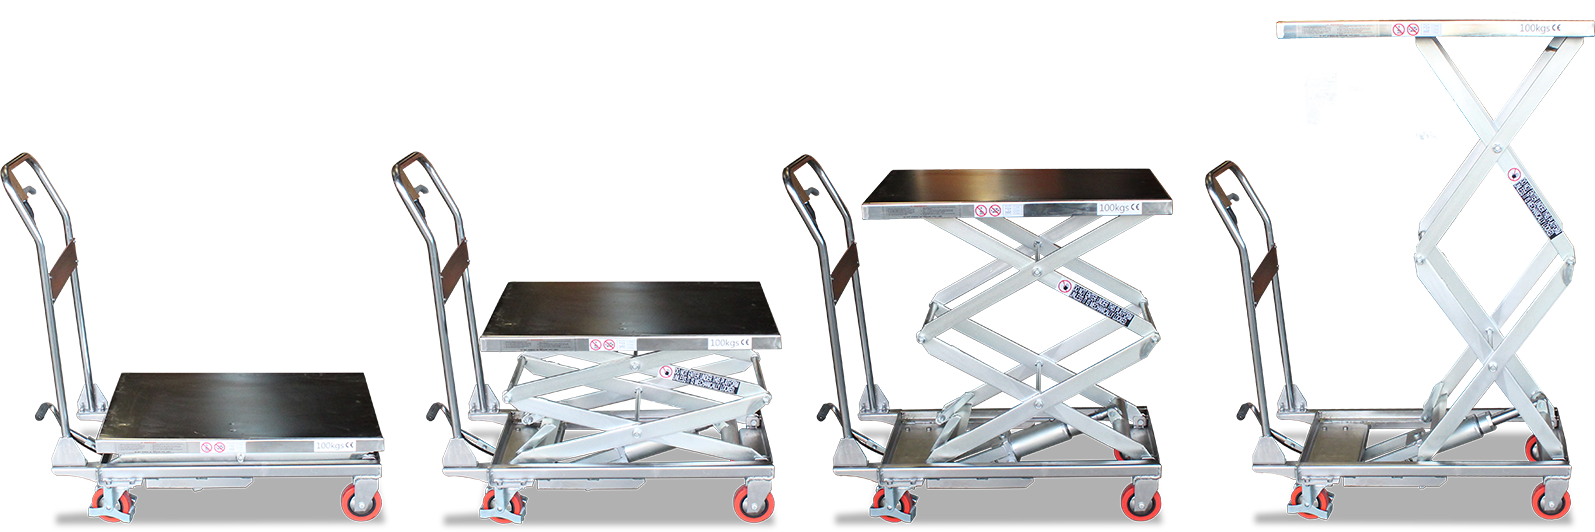 Buy Mobile Scissor Lift Trolley Double (Stainless Steel) in Mobile Lift Tables from Astrolift NZ